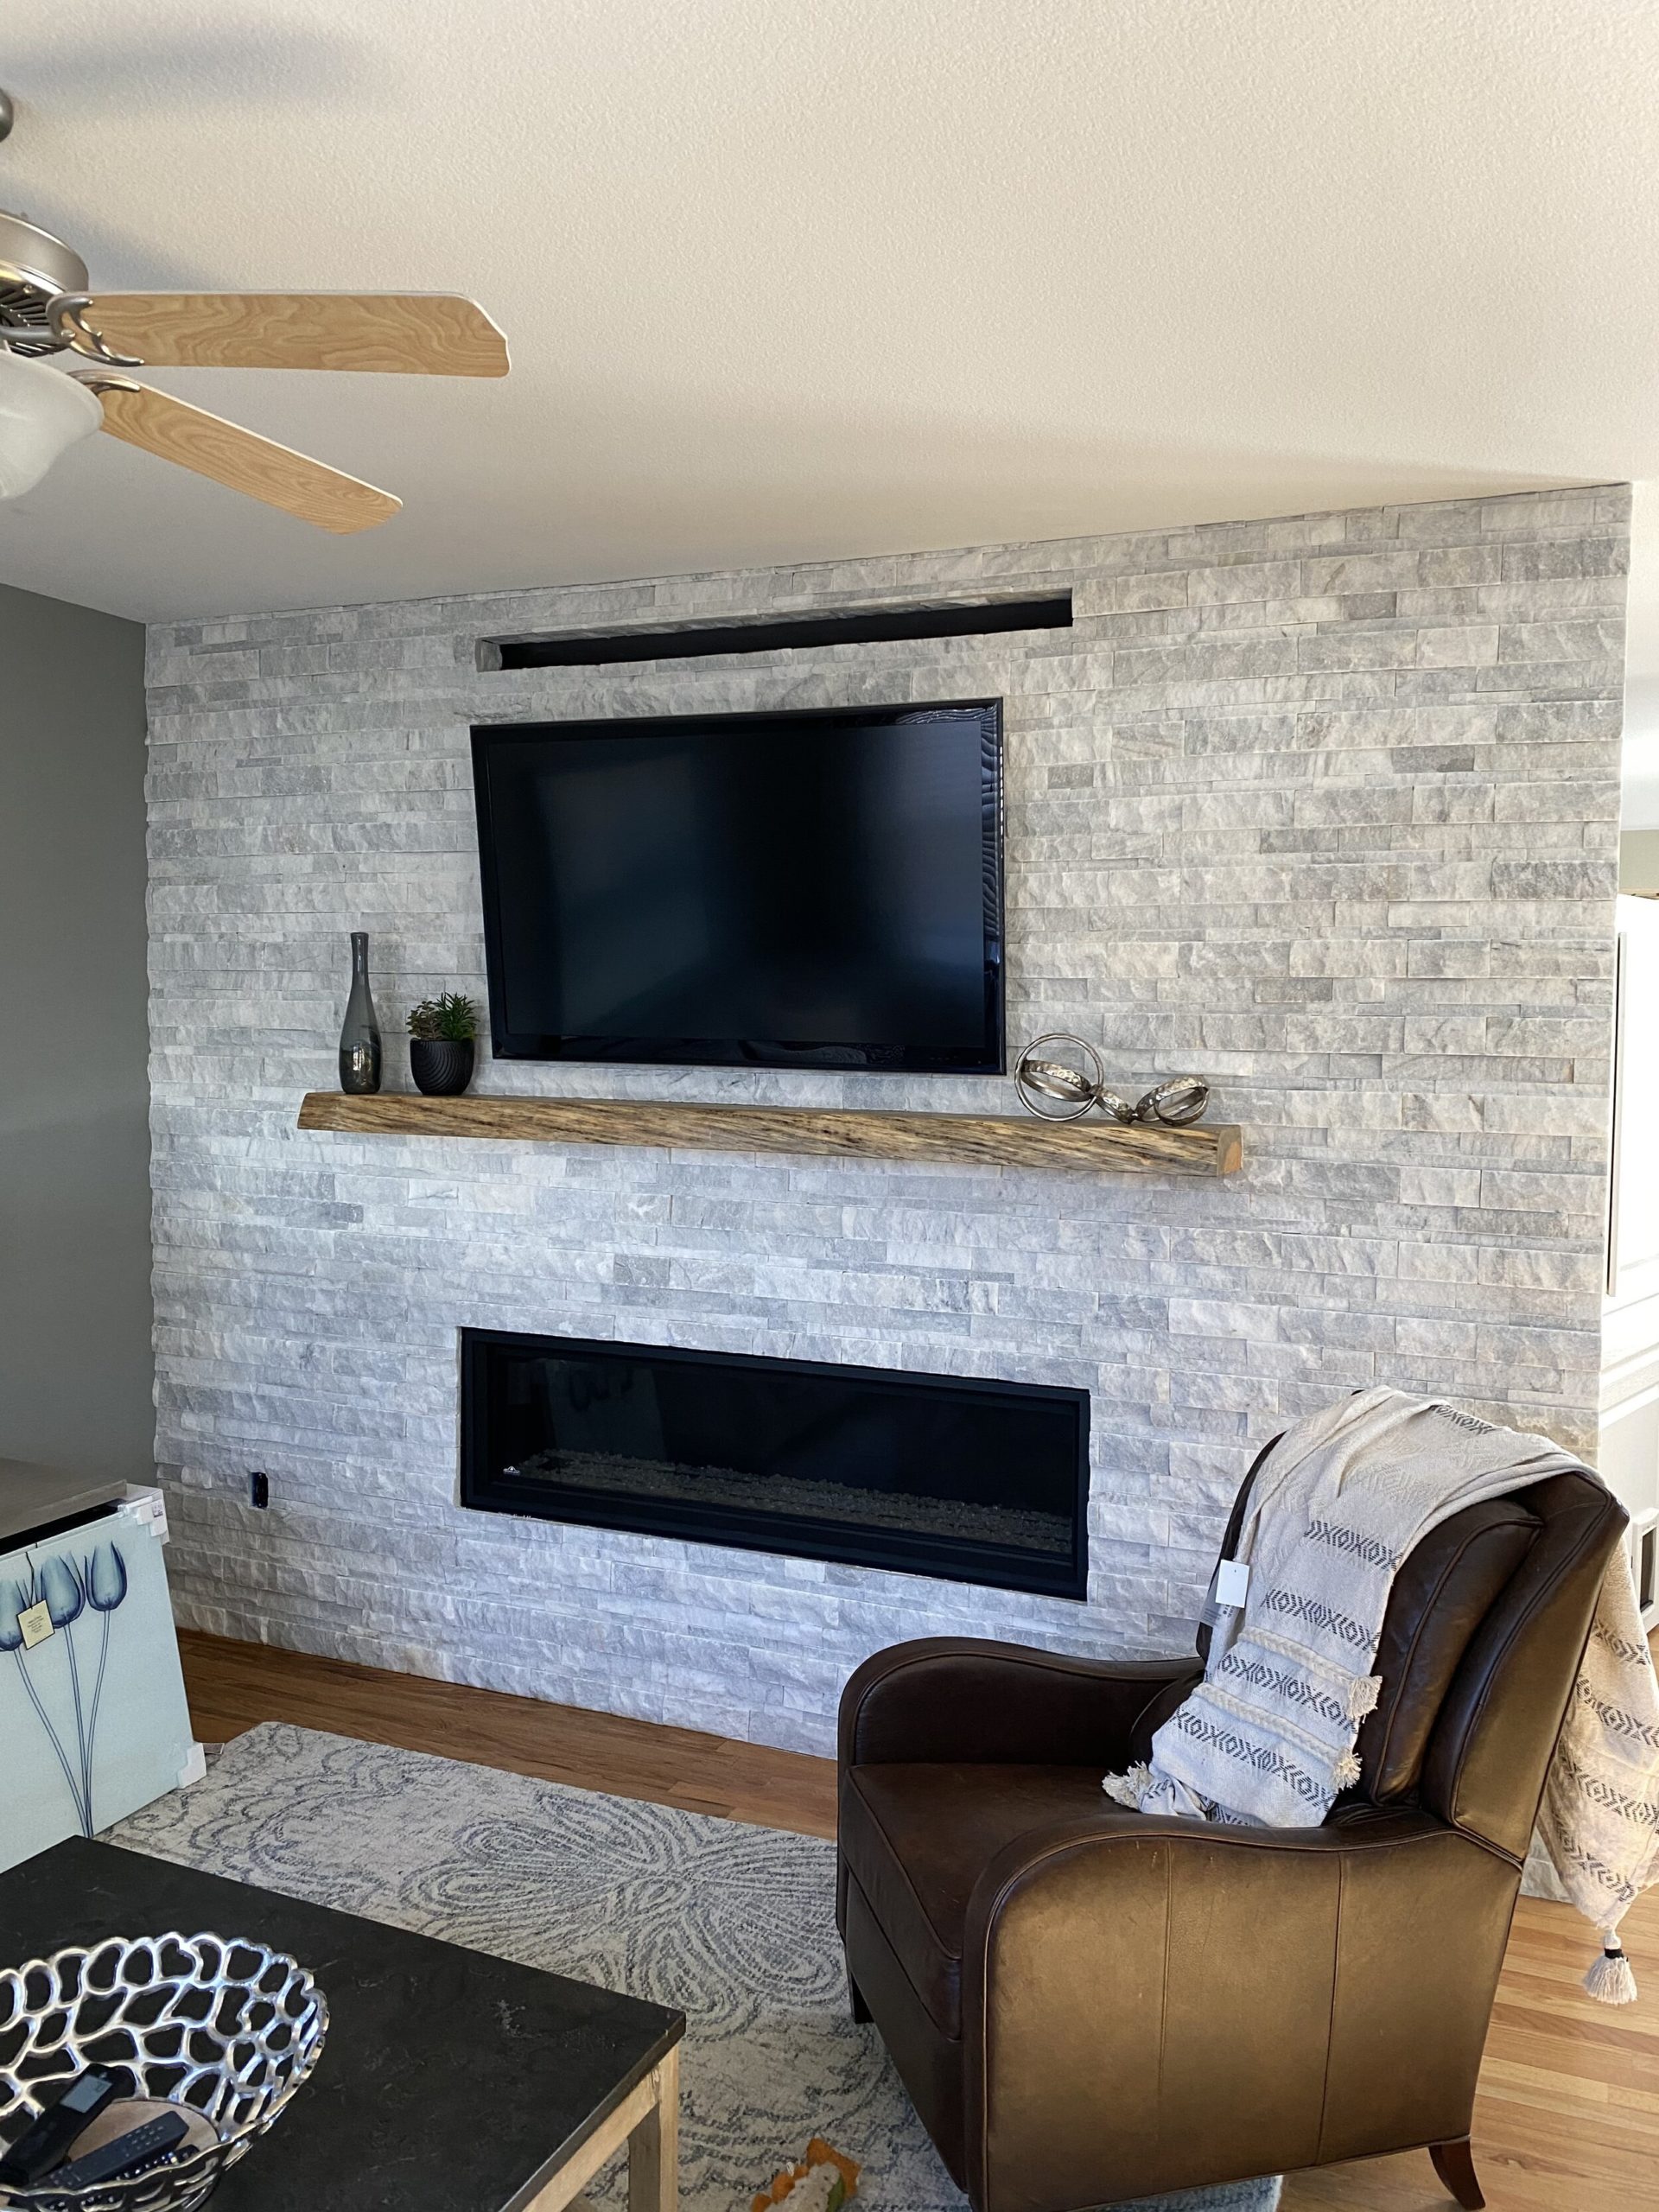 Large white stone fireplace with wooden mantel and mounted TV